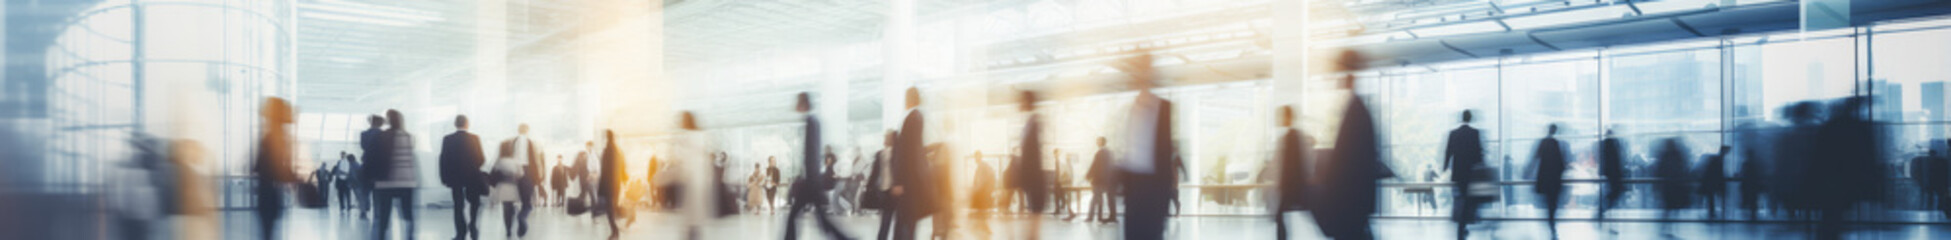 Blurred business people walking at a trade fair, conference or walking in a modern hall or airport, motion speed blur, wide panoramic banner.